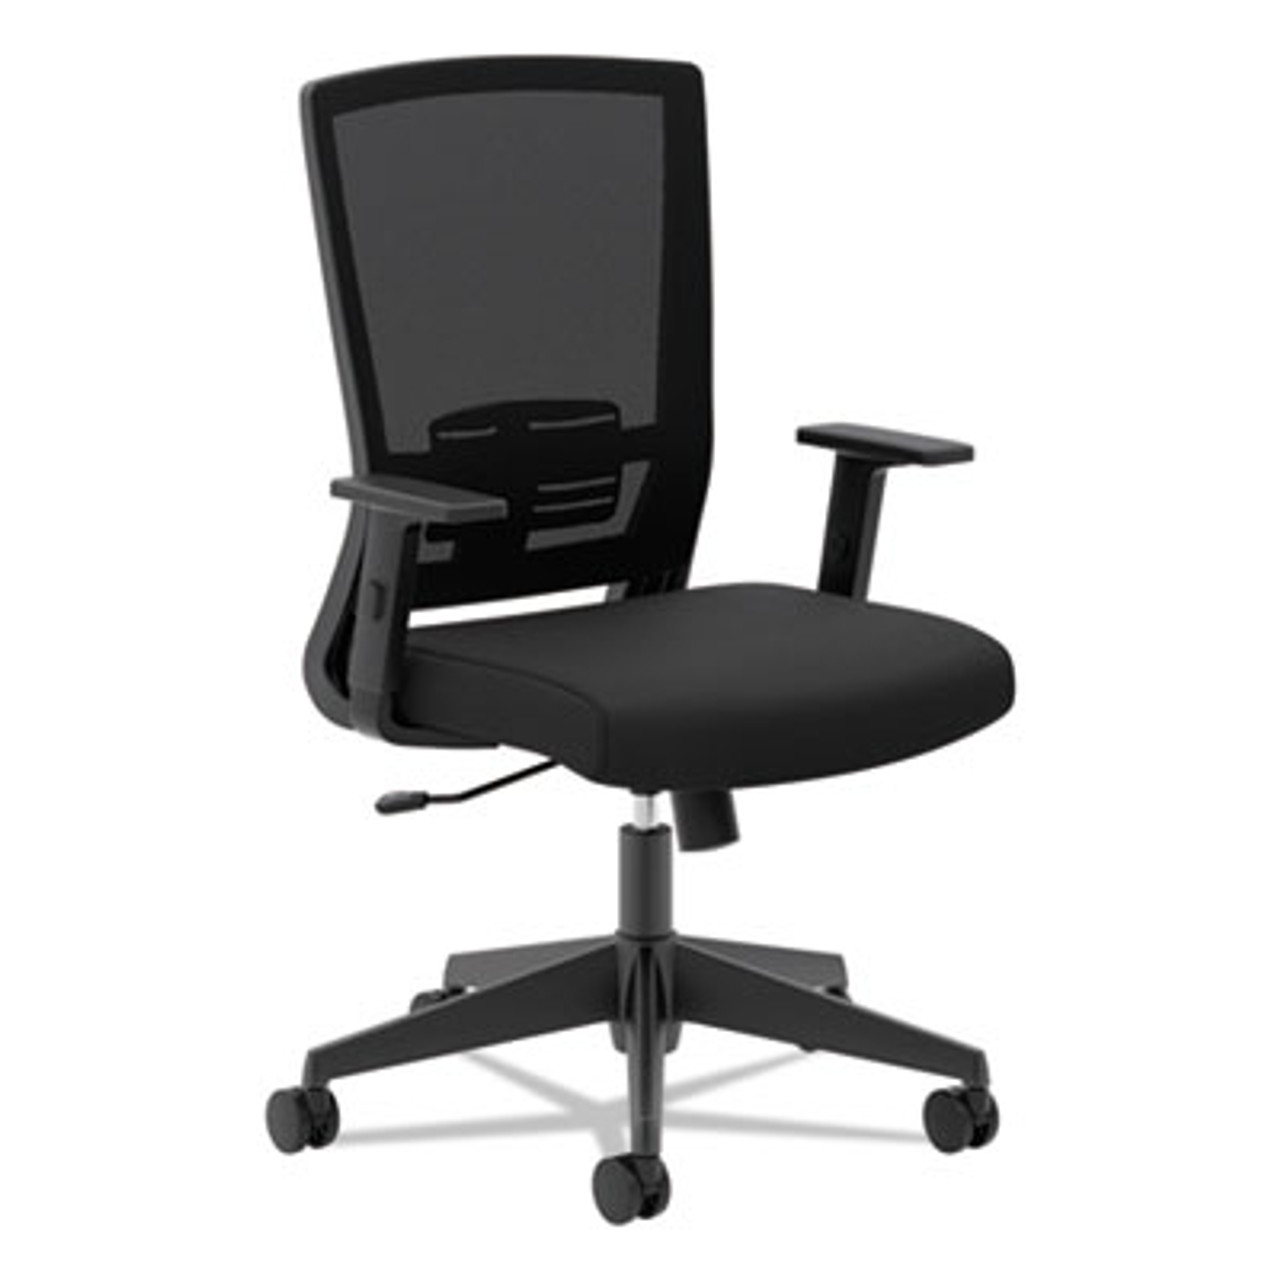 VL541 Mesh High-Back Task Chair with Arms, Black